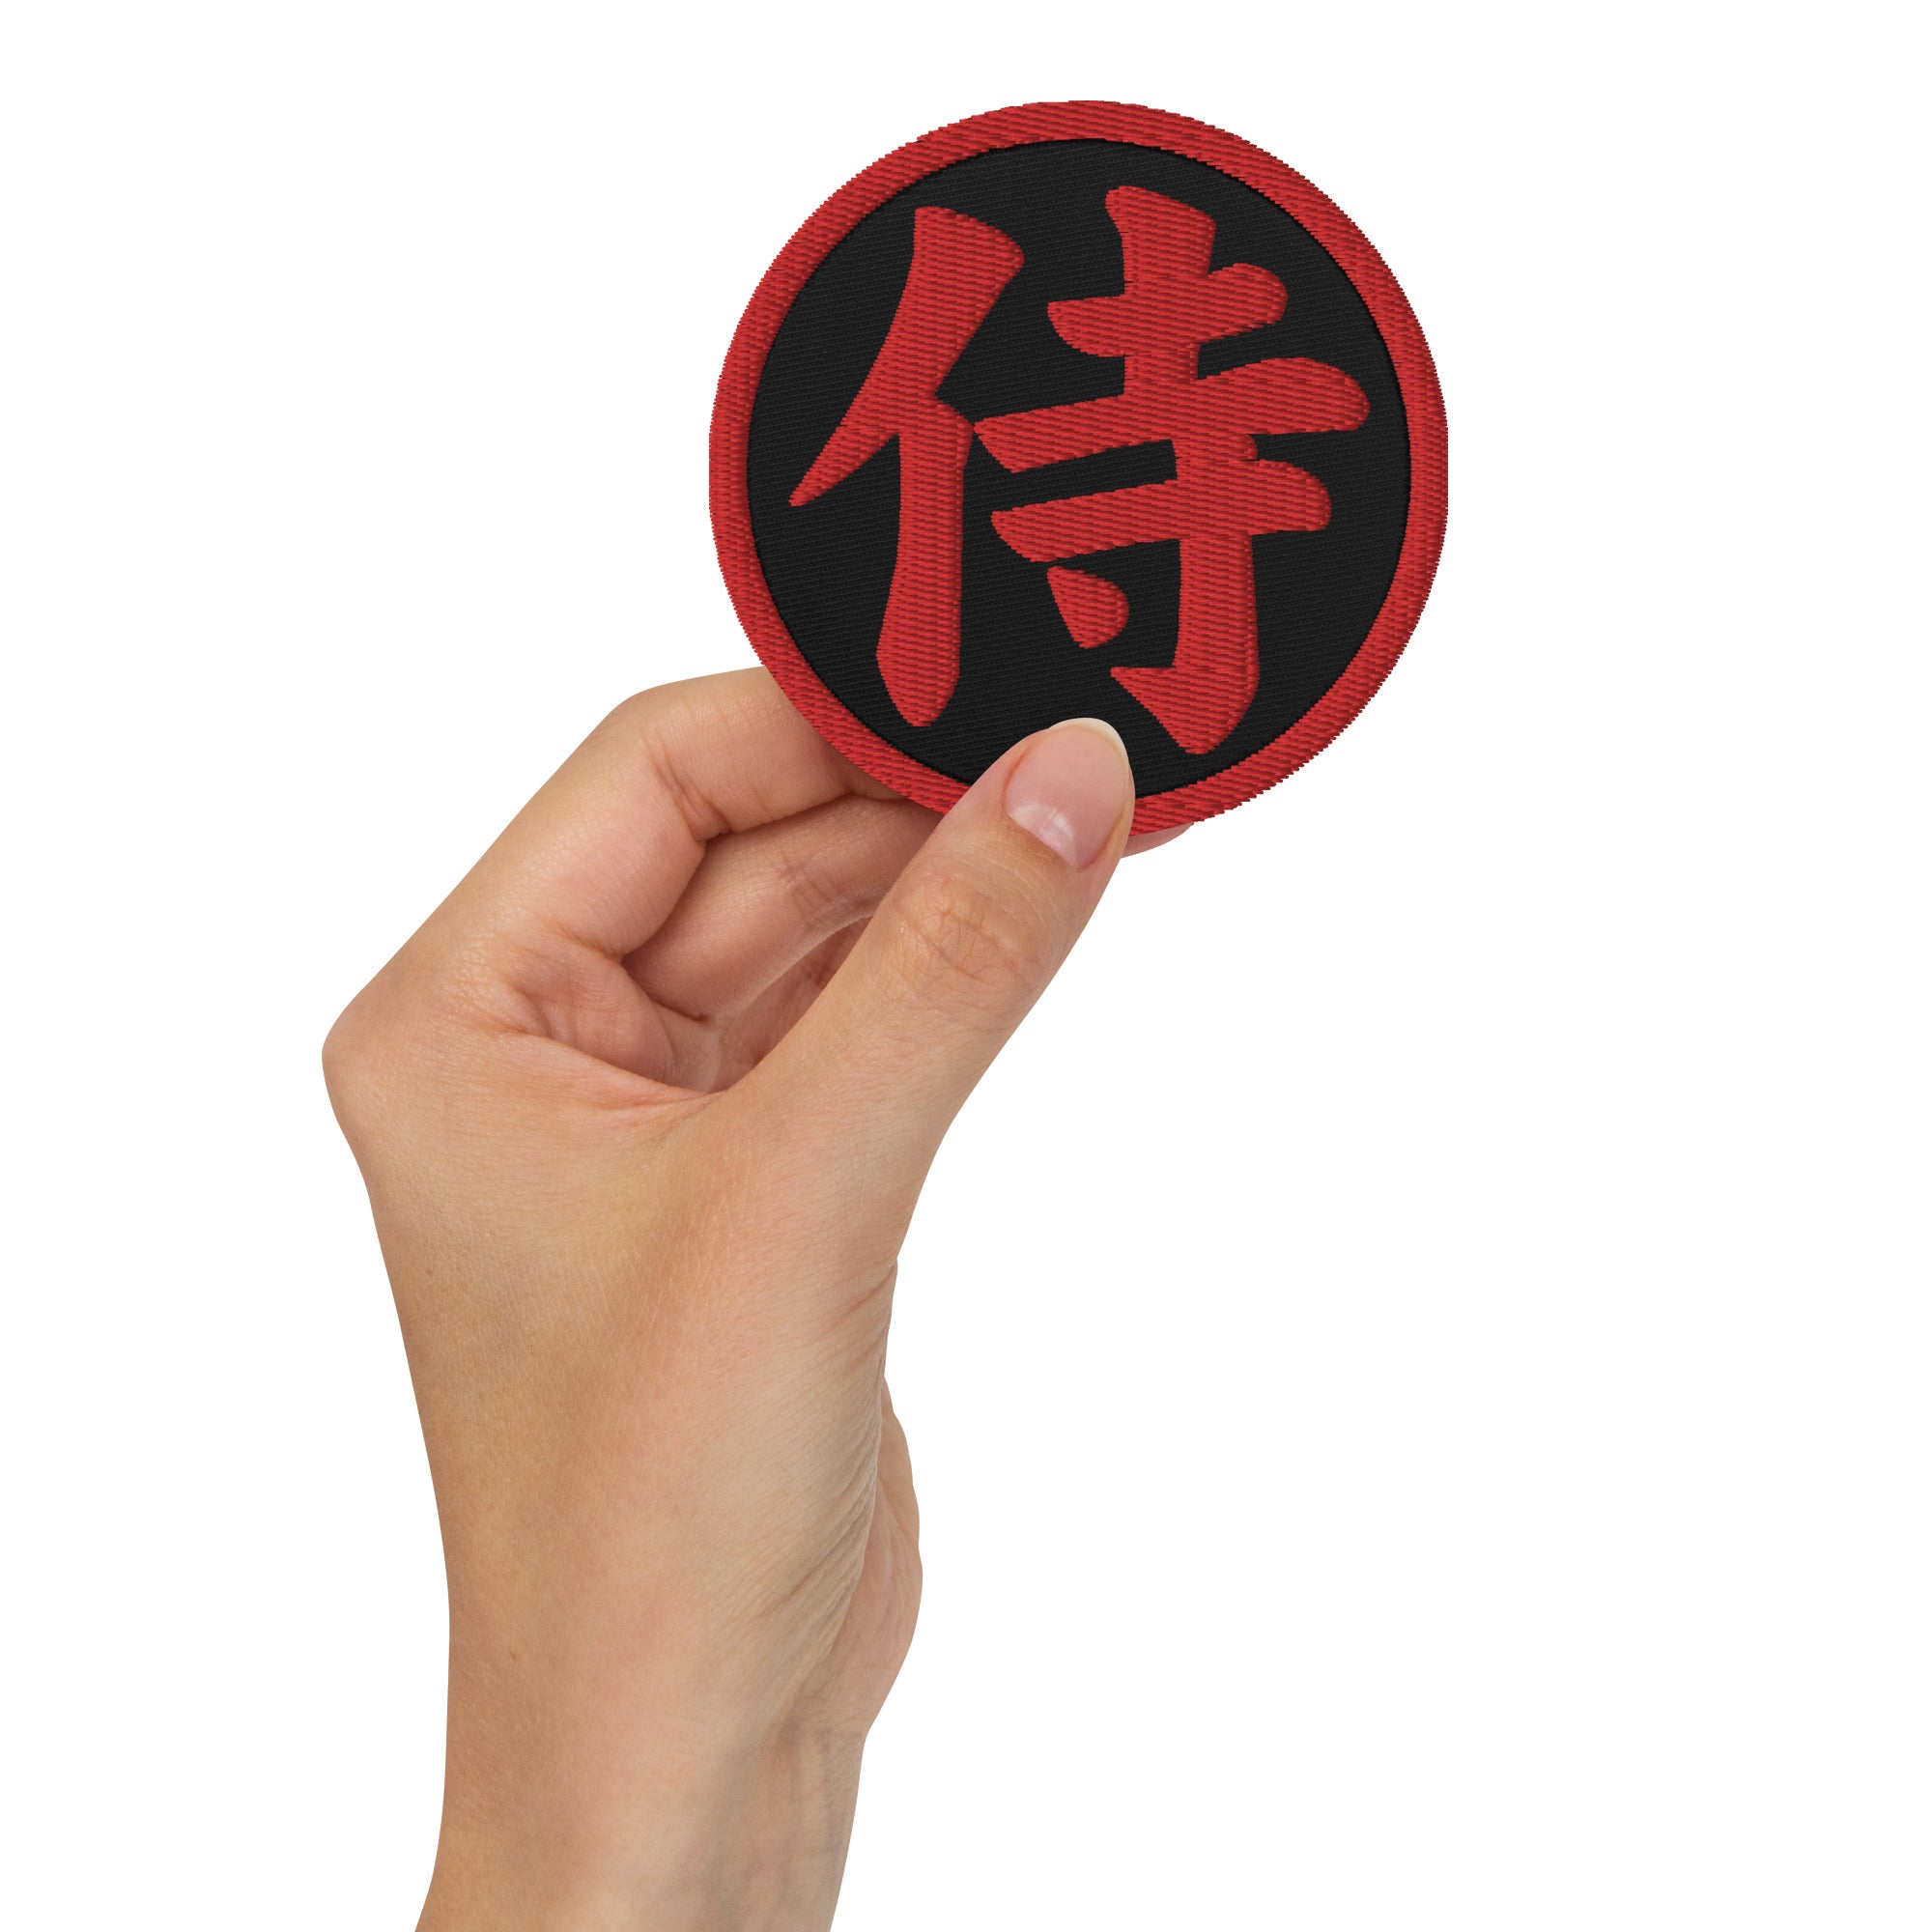 Samurai The Japanese Kanji Symbol Embroidered Patch Red Thread Patches - Edge of Life Designs